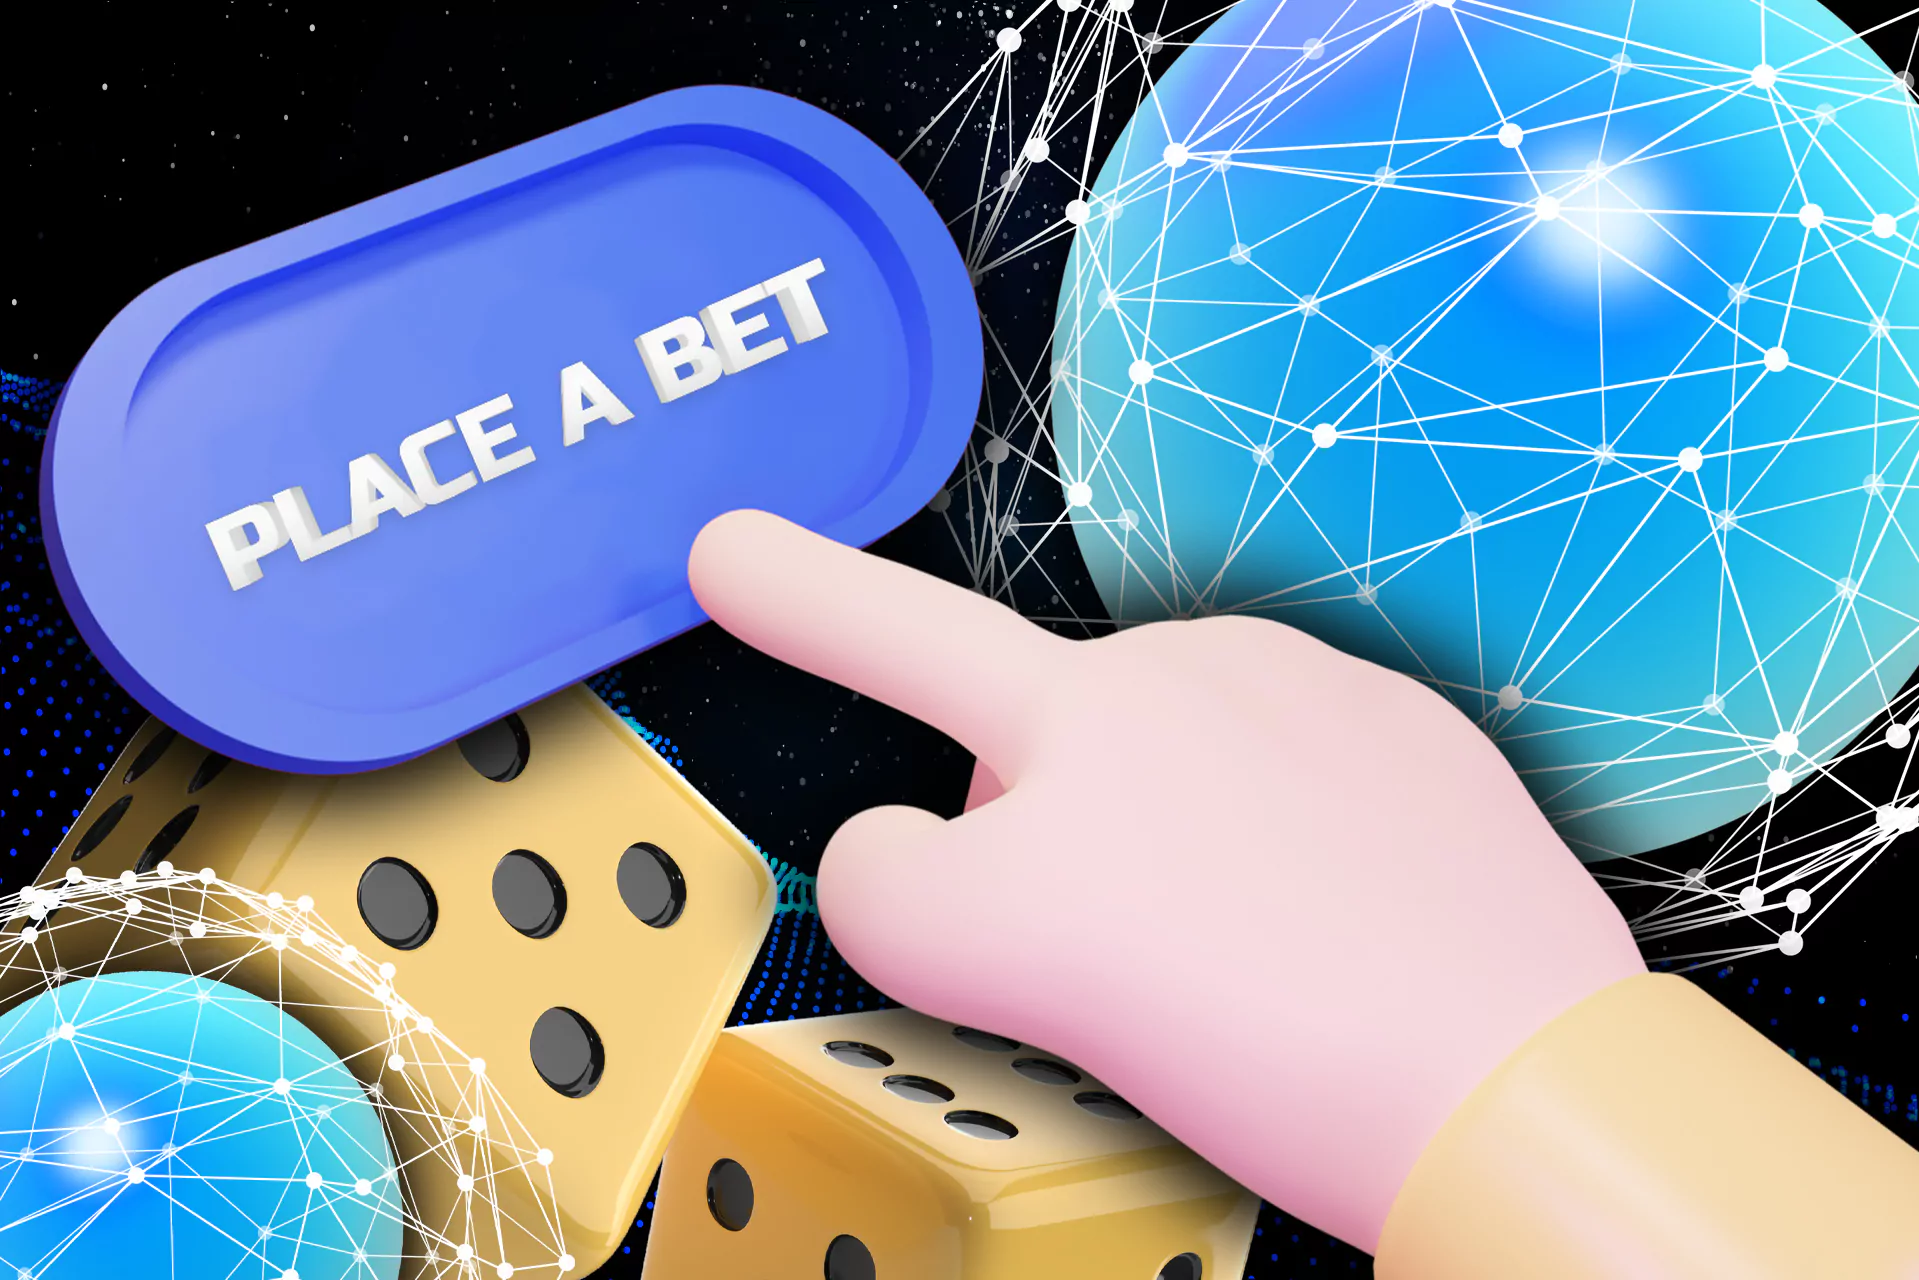 Button to place a bet, and confirm it.